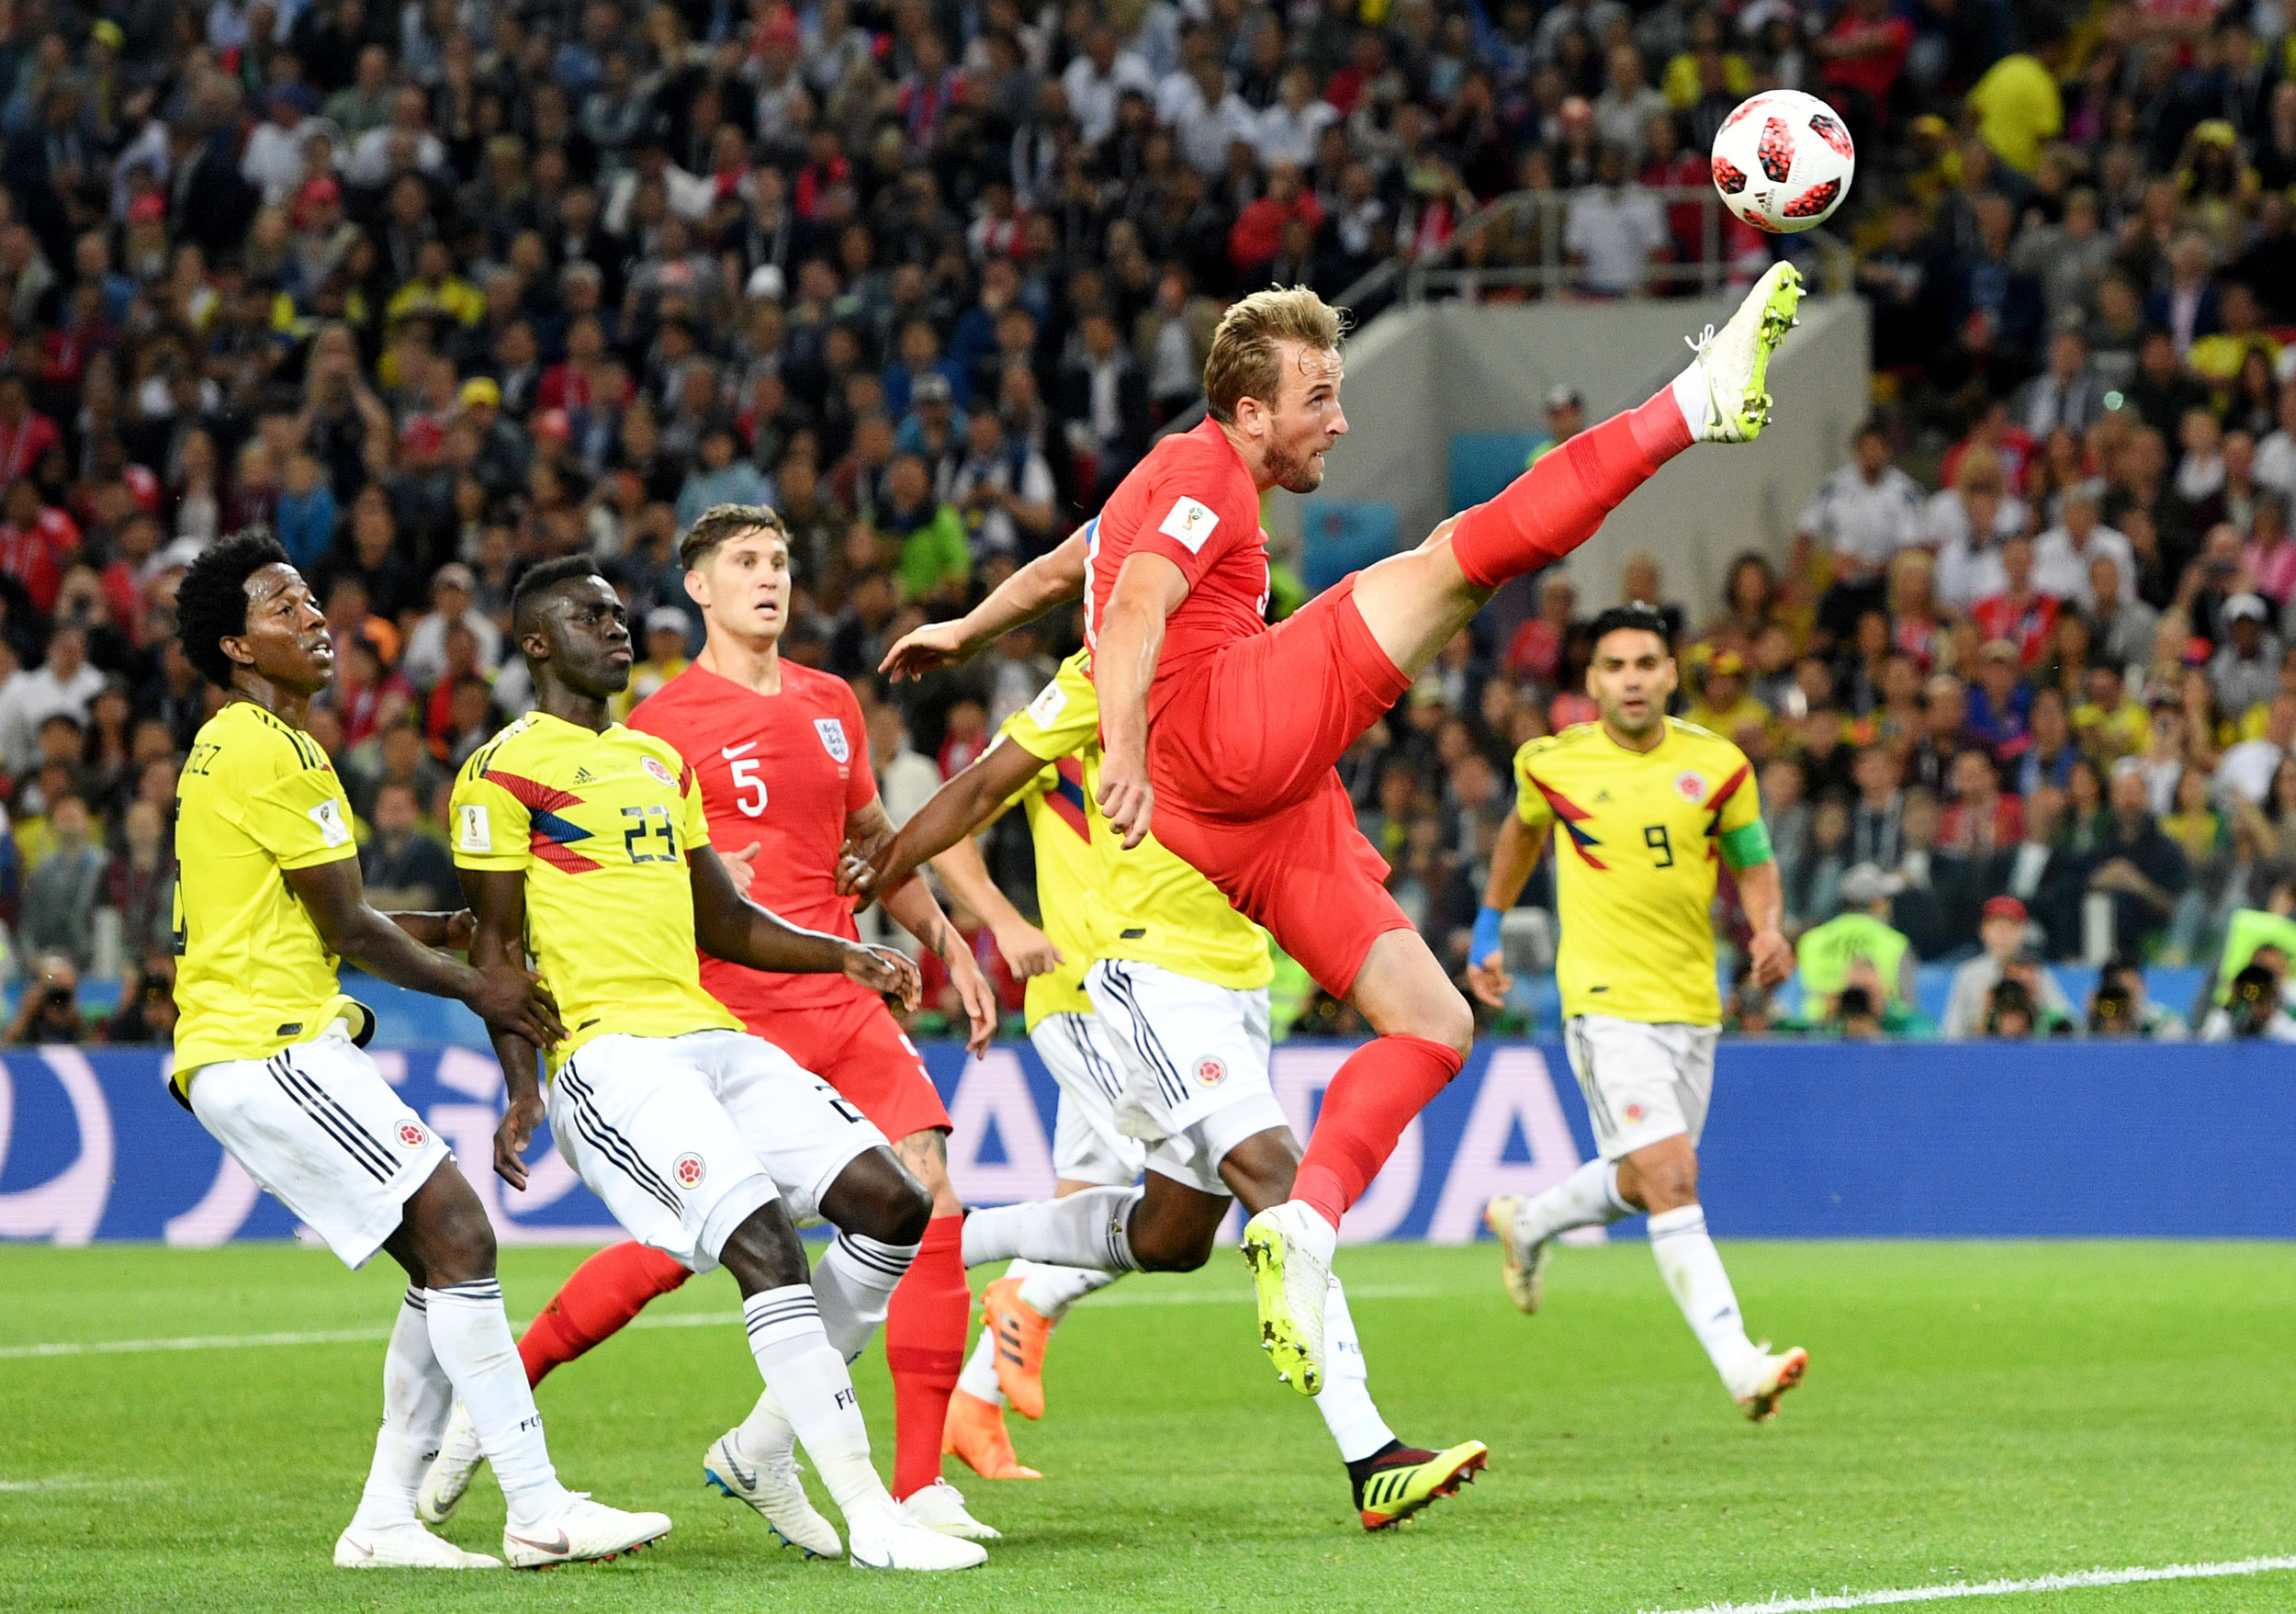  Harry Kane of England in action during the FIFA World Cup 2018 round of 16 football match between Colombia and England in Moscow.
Photo by Facundo Arrizabalaga, 03 July 2018
 